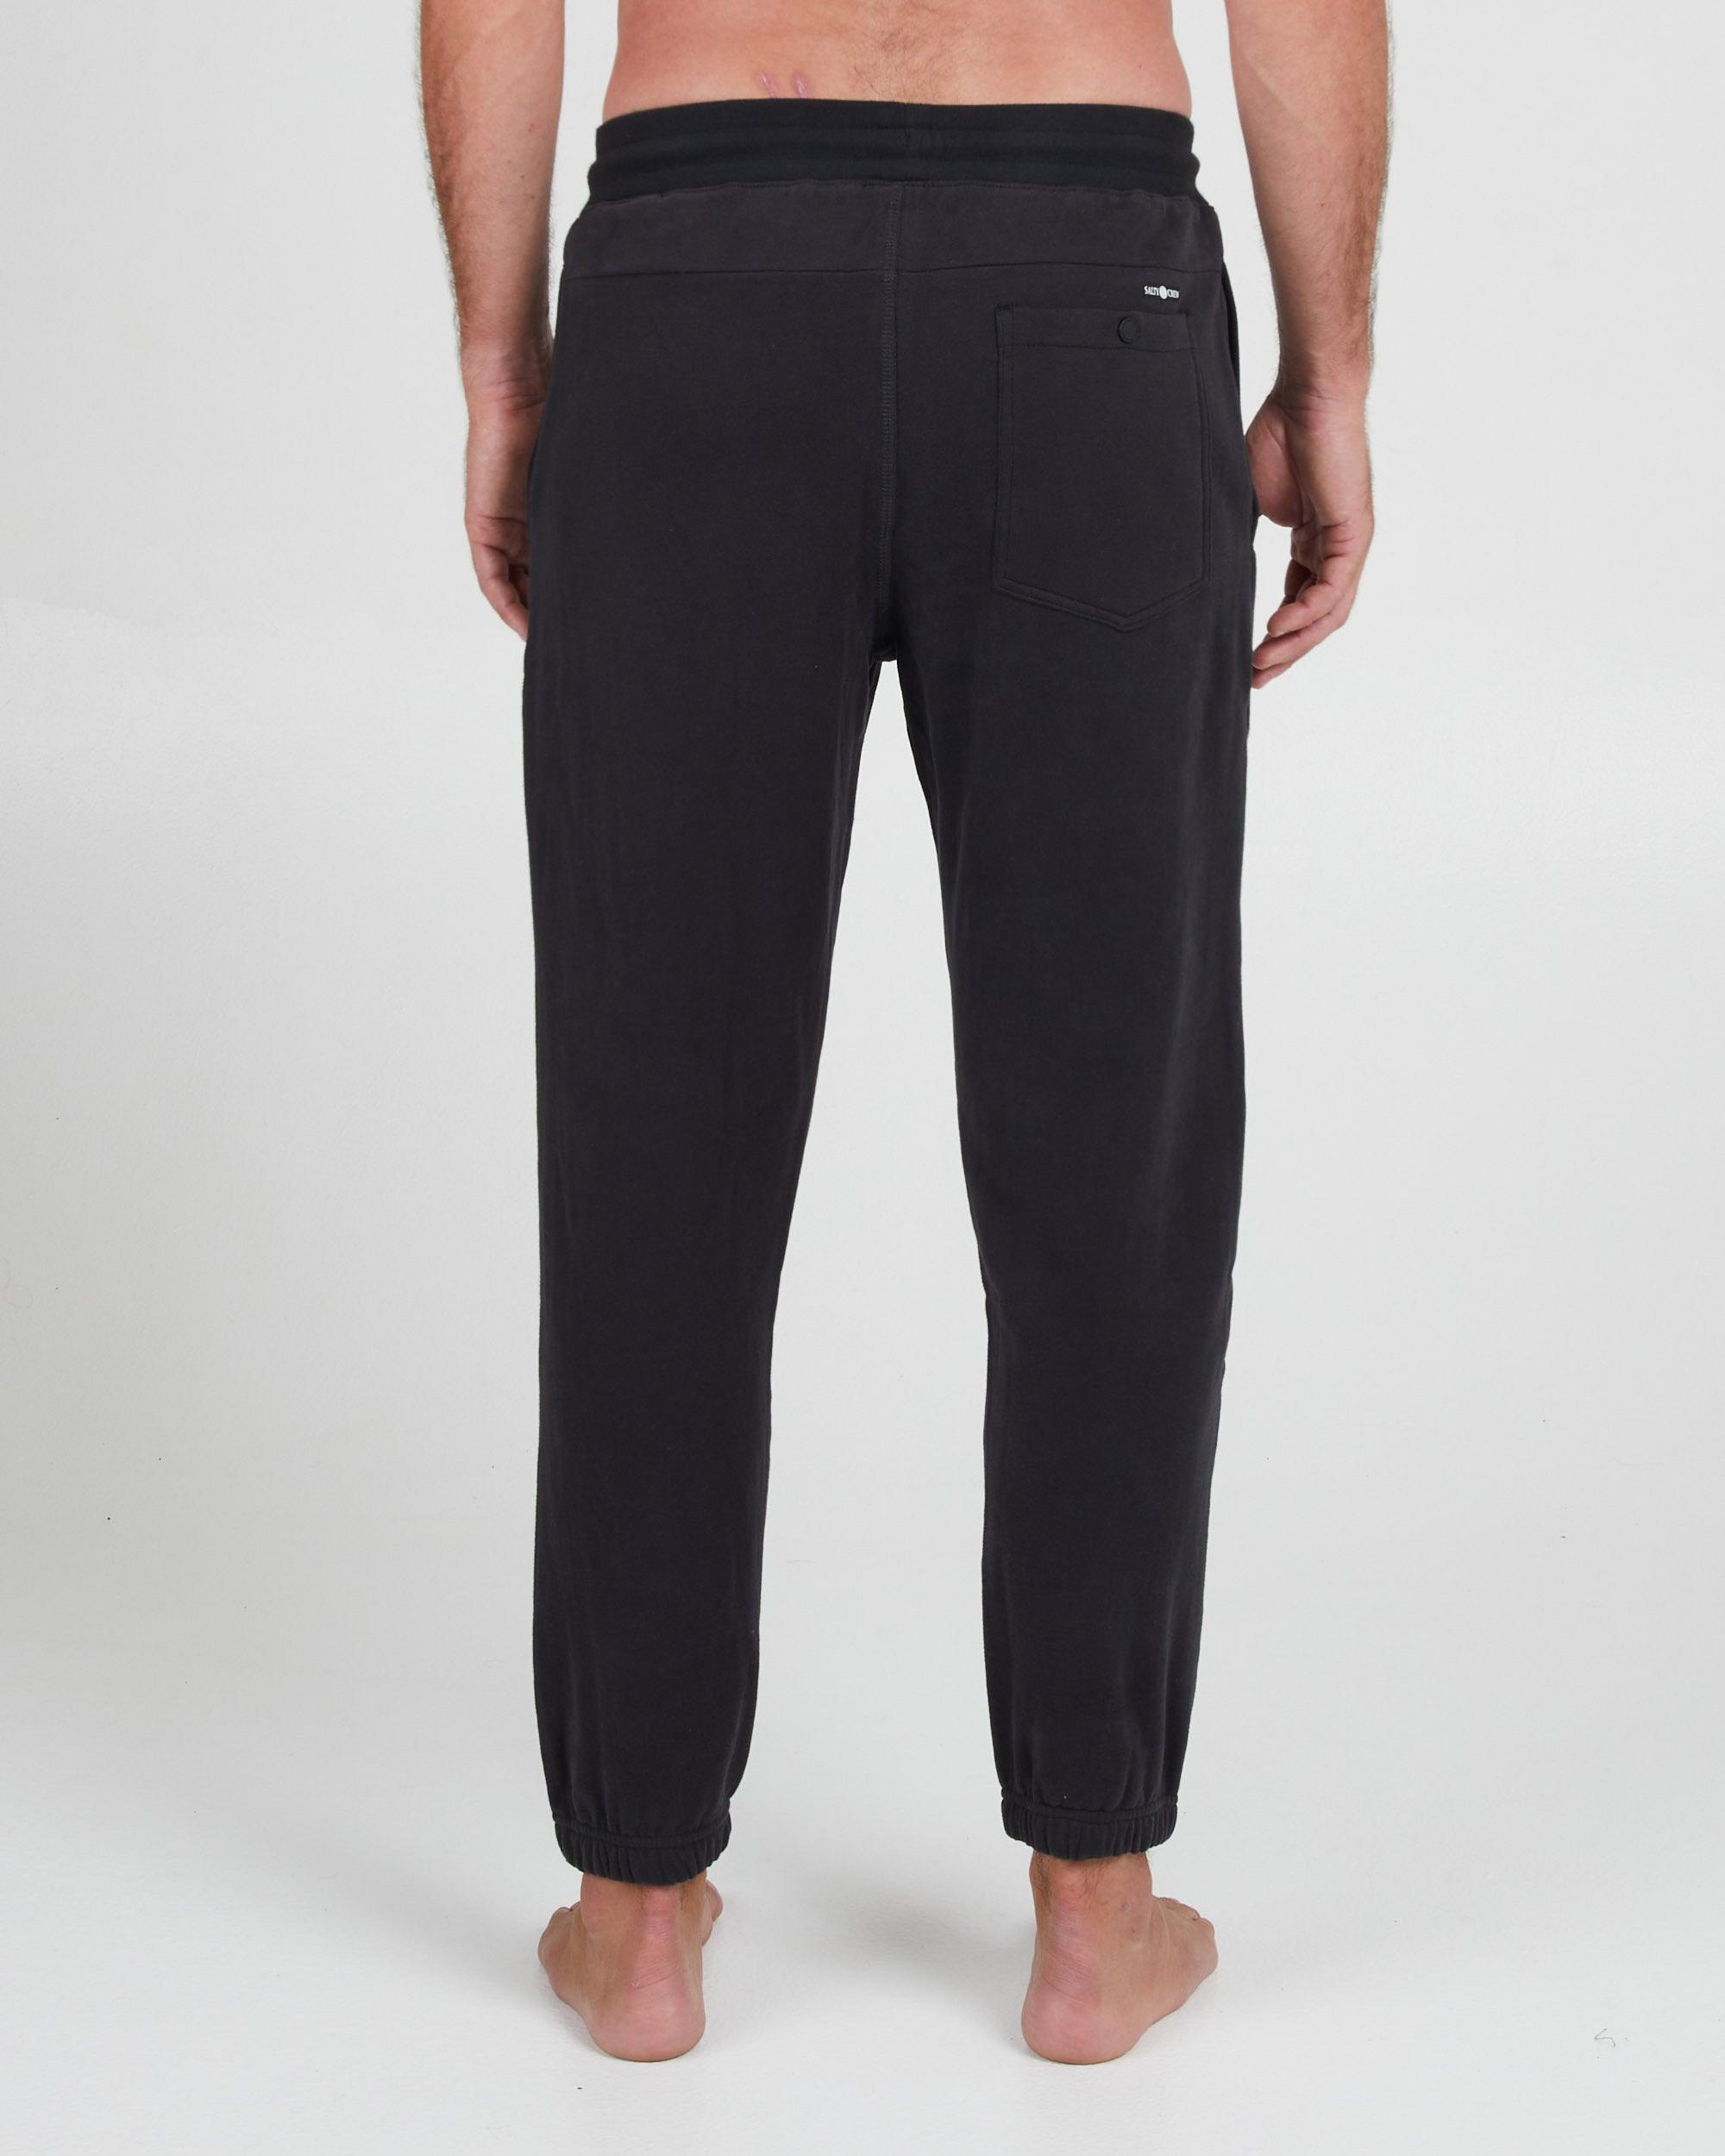 Dockside Sweatpant - Black - Purpose-Built / Home of the Trades